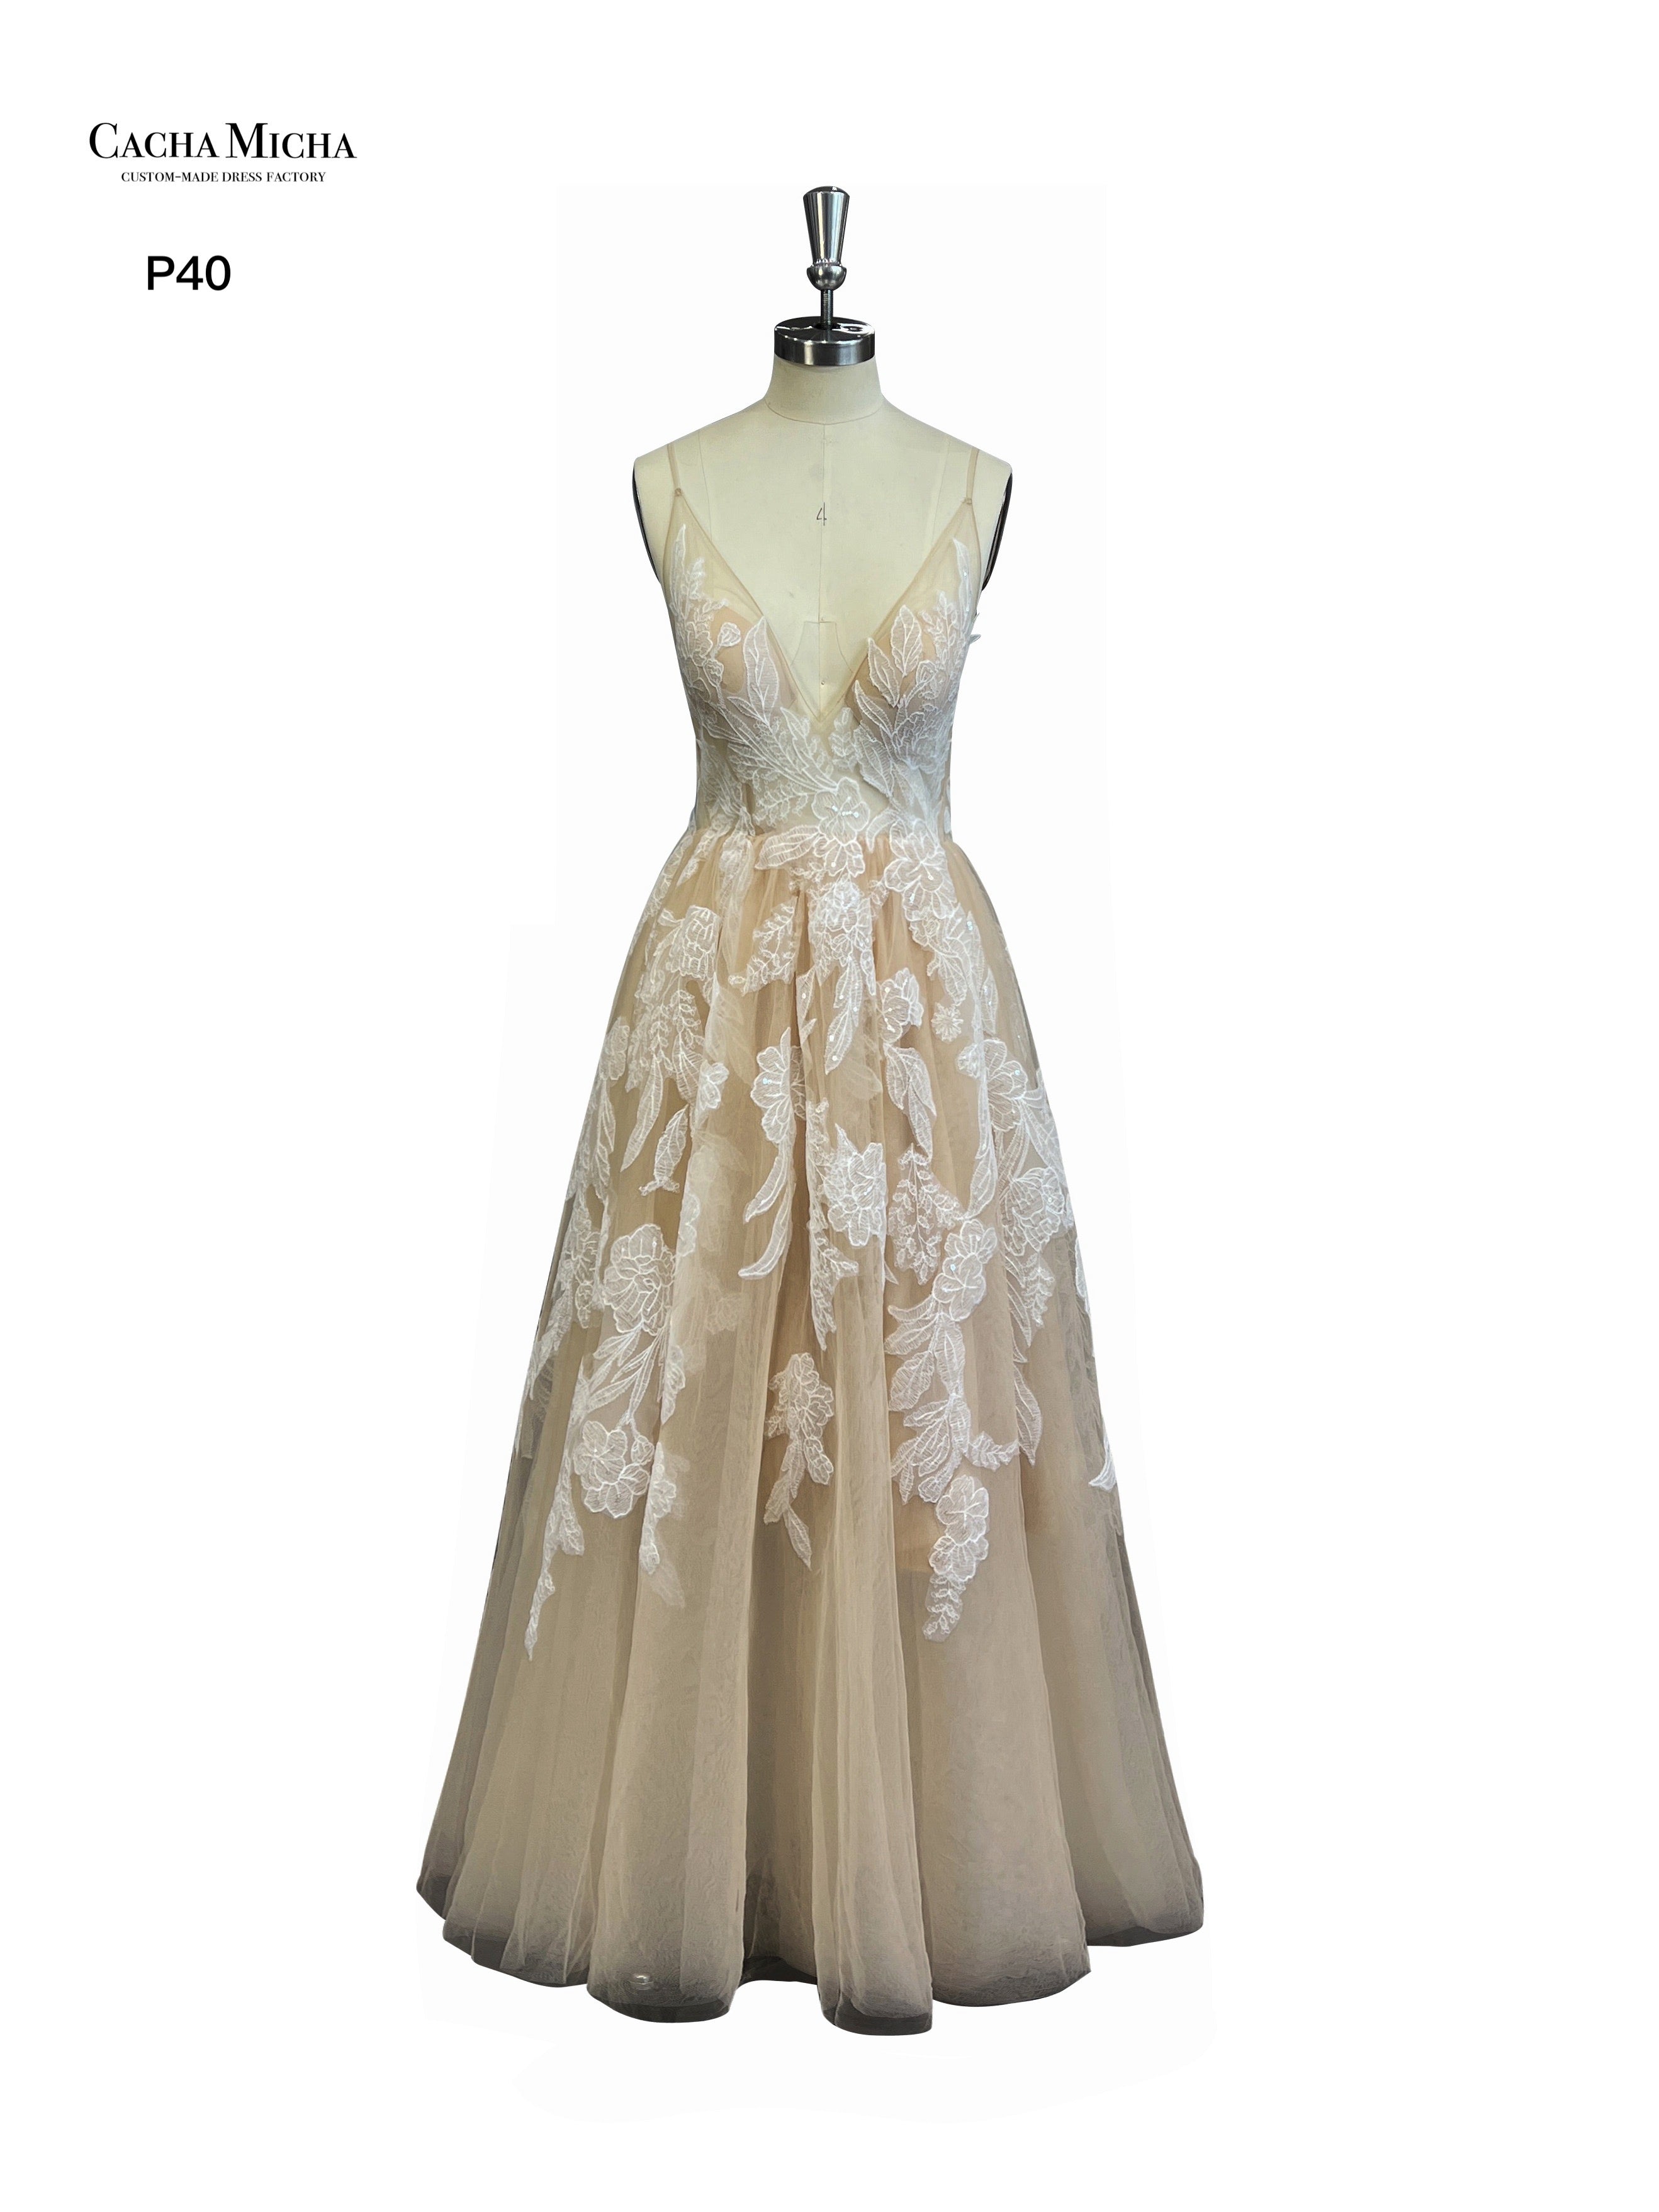 Backless Ivory Lace Champagne Prom Dress P40